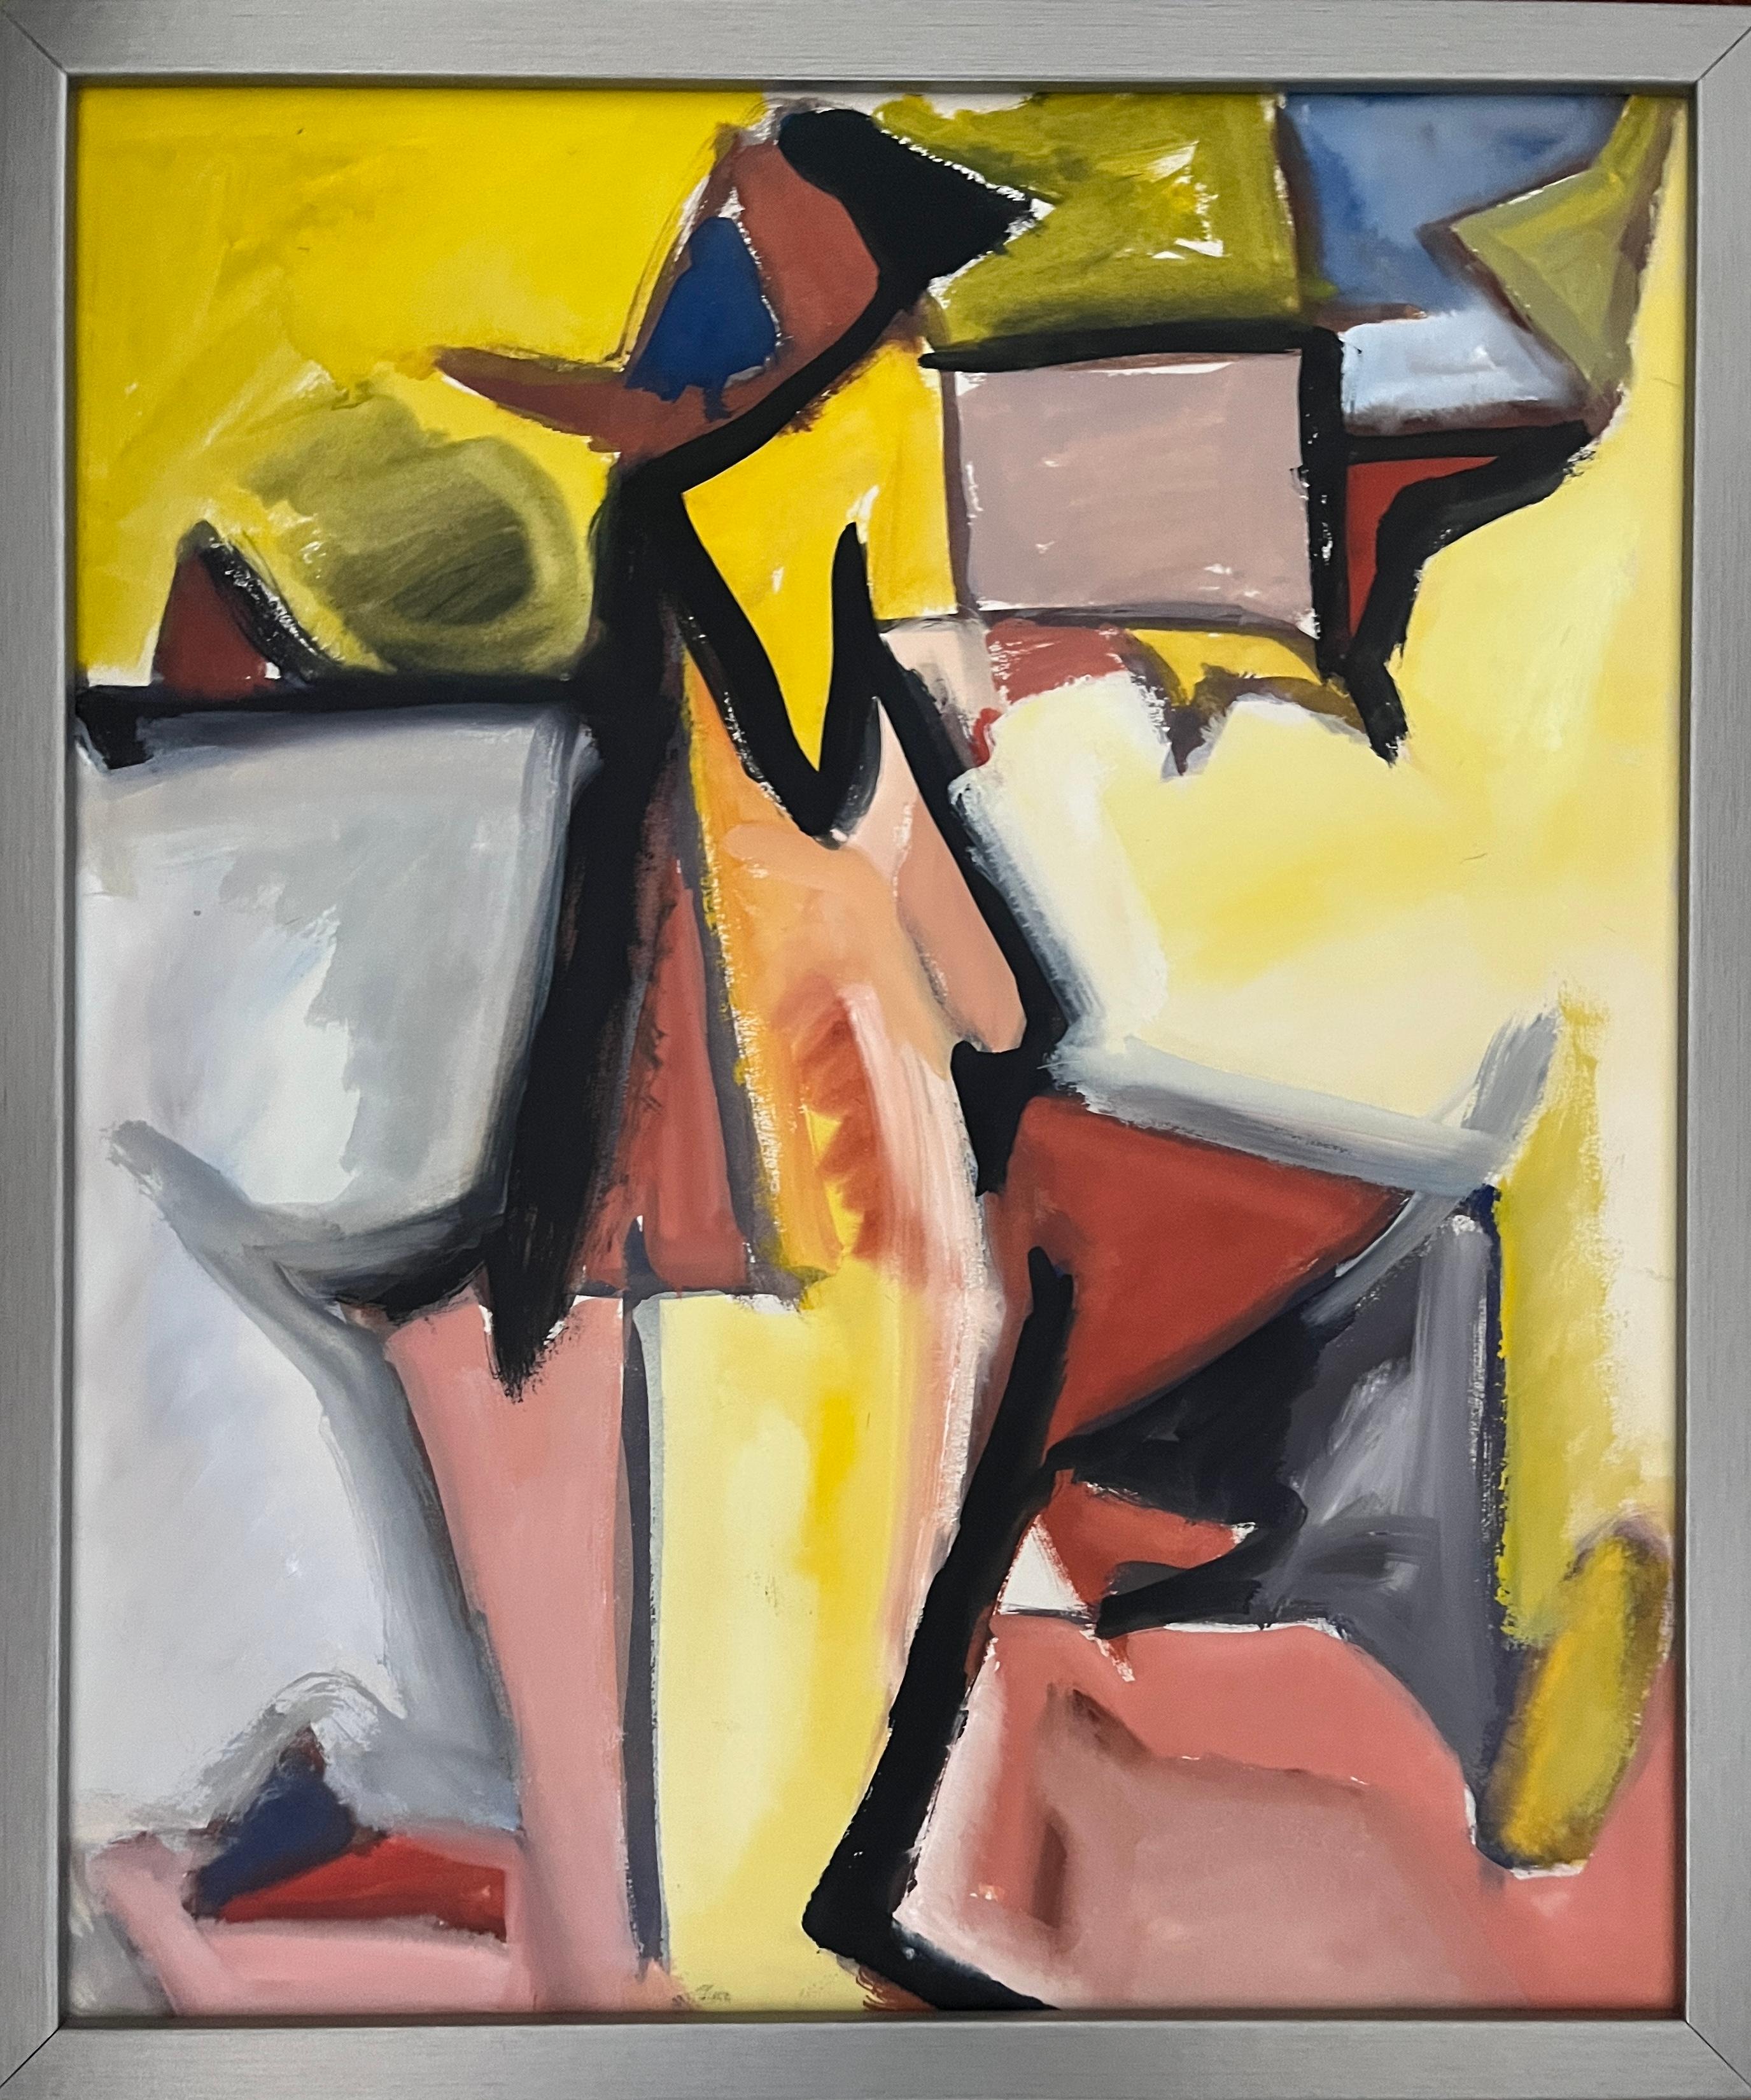 From the estate of Jerry Opper & Ruth Friedmann Opper
Yellow Cubist FIgure
c. 1940-1950's
Gouache
15" x 18", silver wood frame 16"x19"
Unsigned

This striking gouache painting features a vibrant yellow cubist figure against a background of earthy